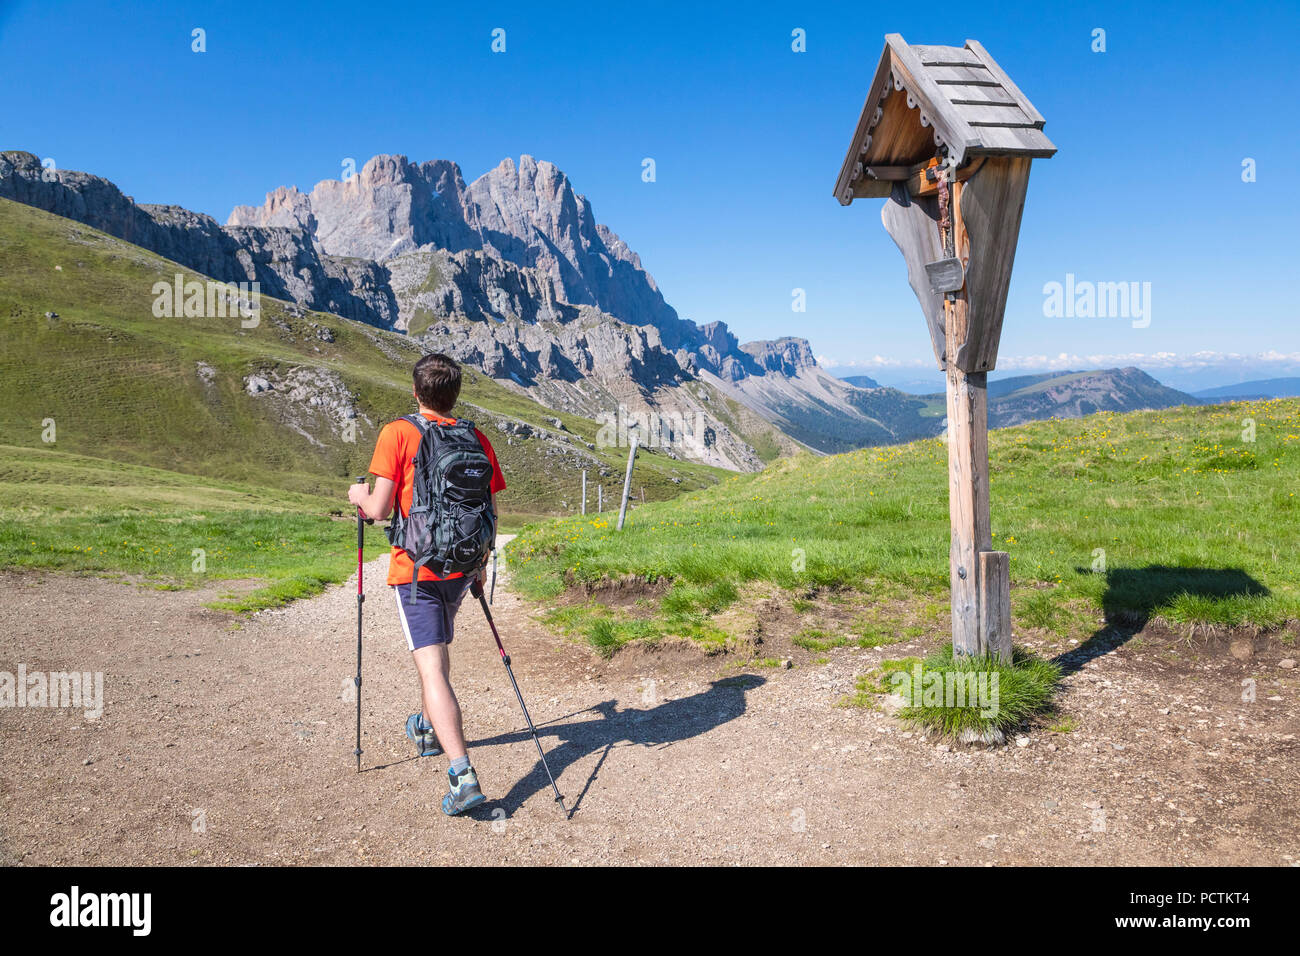 Young man, hiker at Poma pass / Kreuzkofeljoch with the mountain massif Odle / Geisler in background, Puez-Geisler Nature Park, Dolomites, Bolzano, South Tyrol, Italy Stock Photo